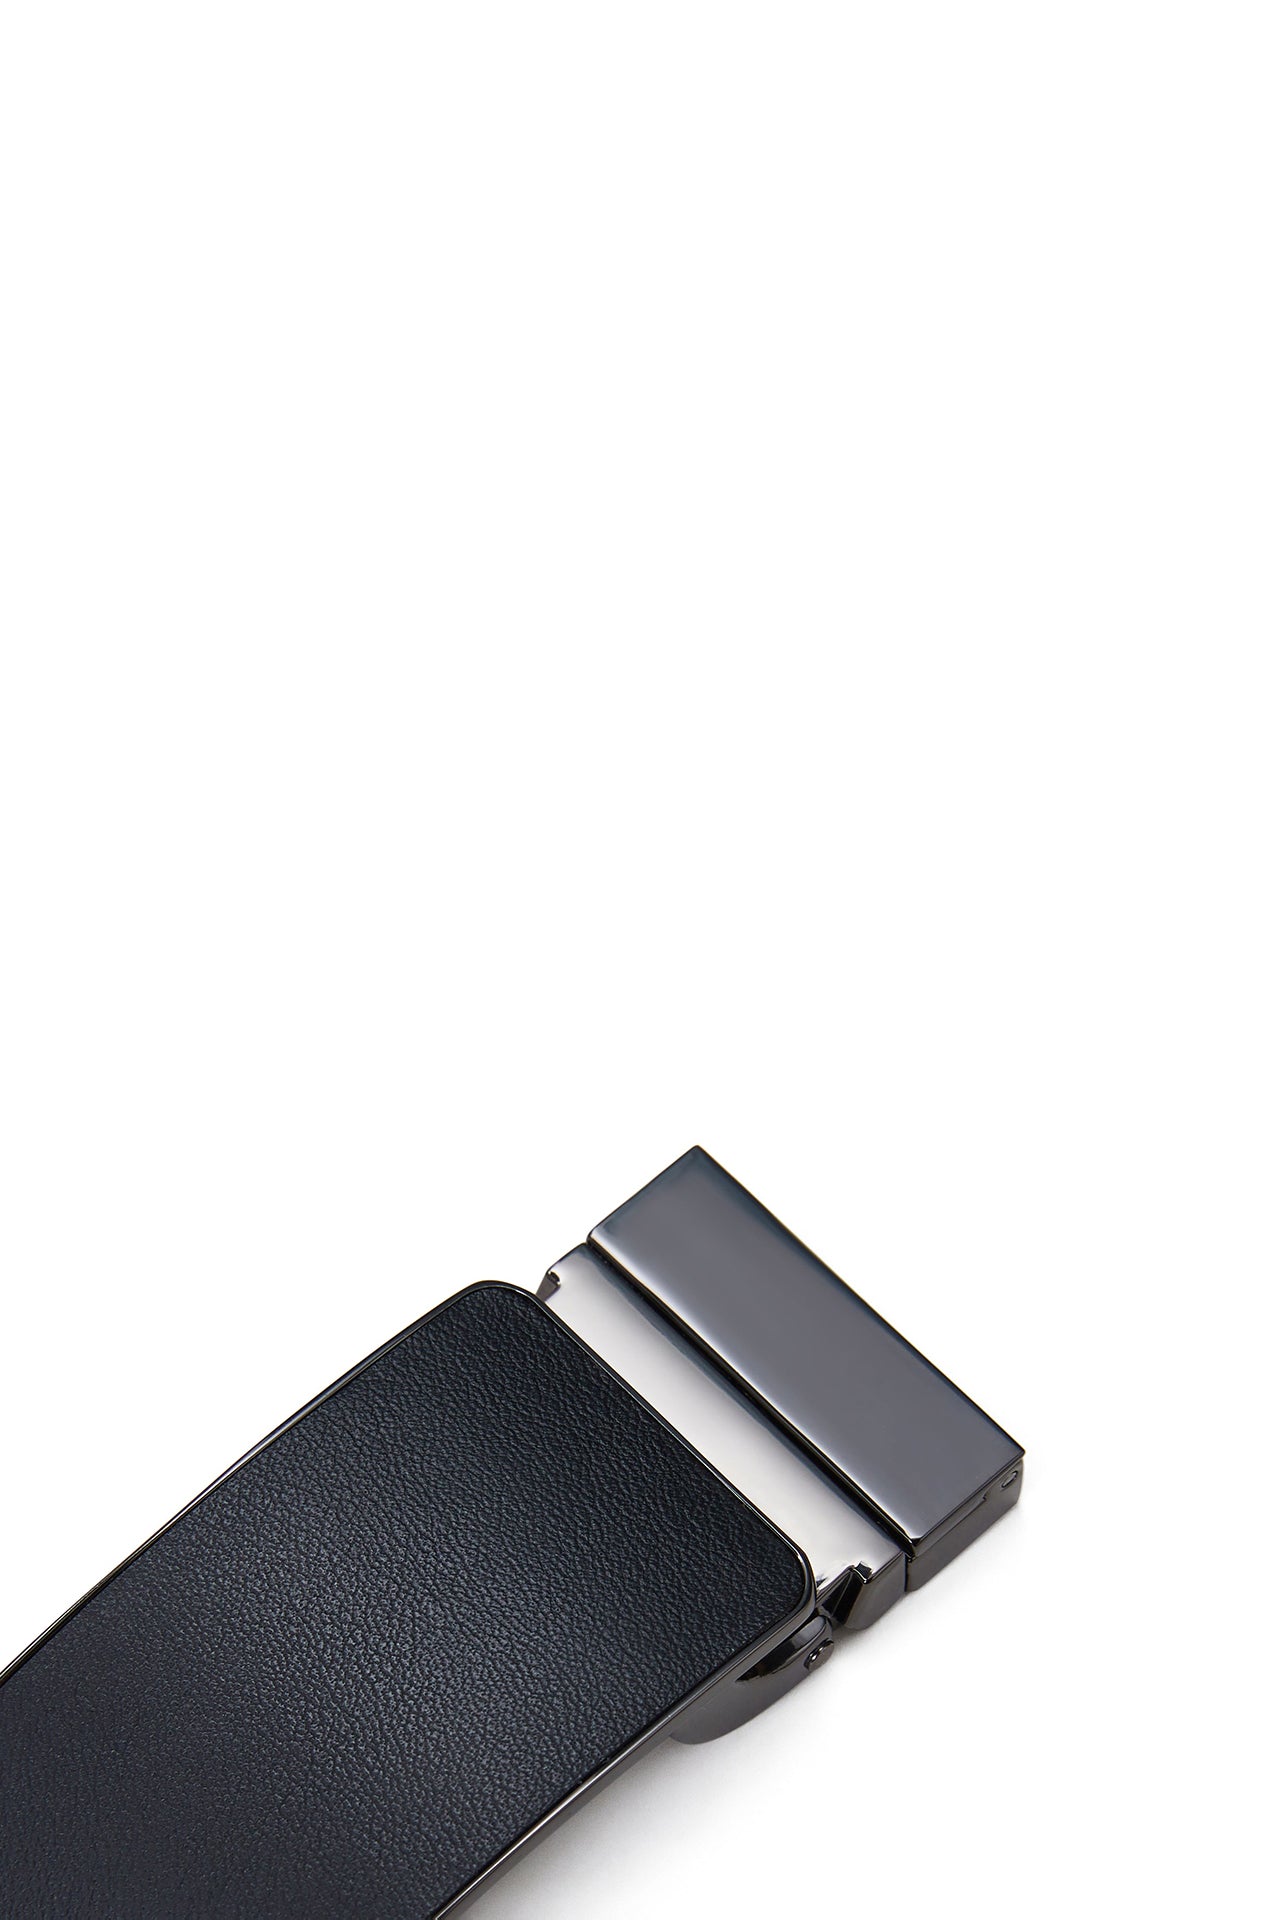 35mm Square Buckle [Without Strap]